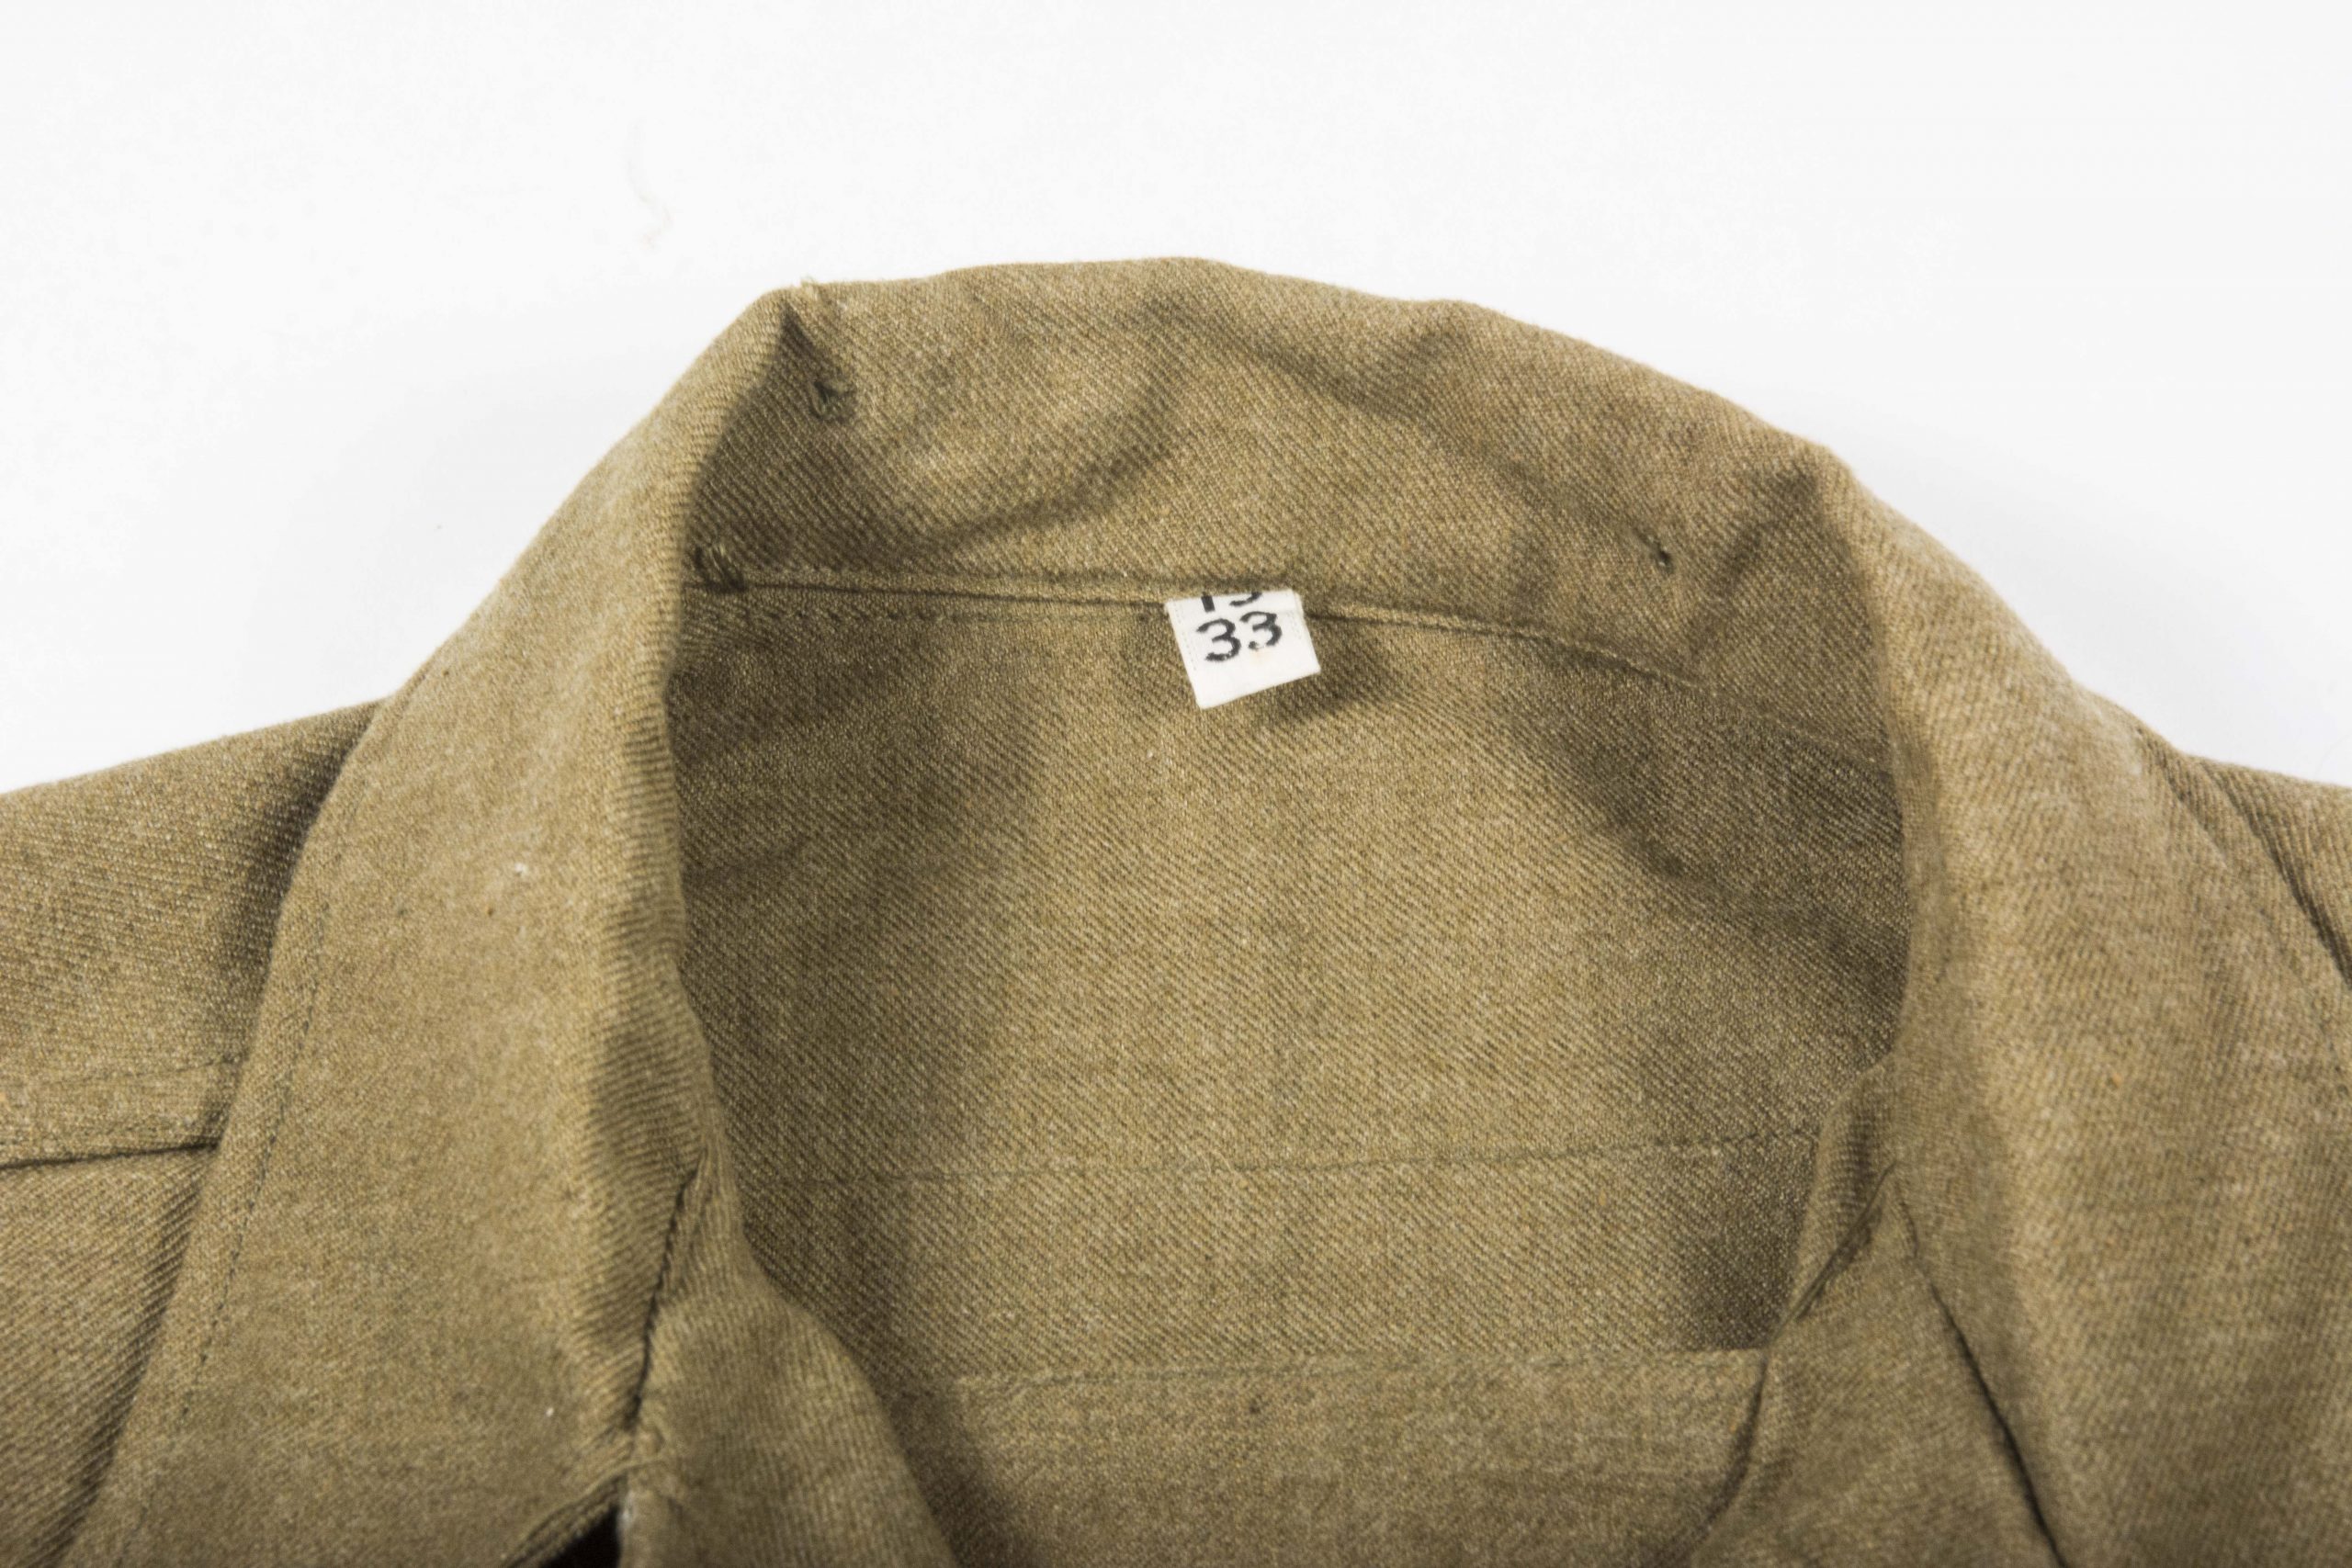 US Wool shirt, special size 15-32, cutter tags Fordham Shirt Company ...